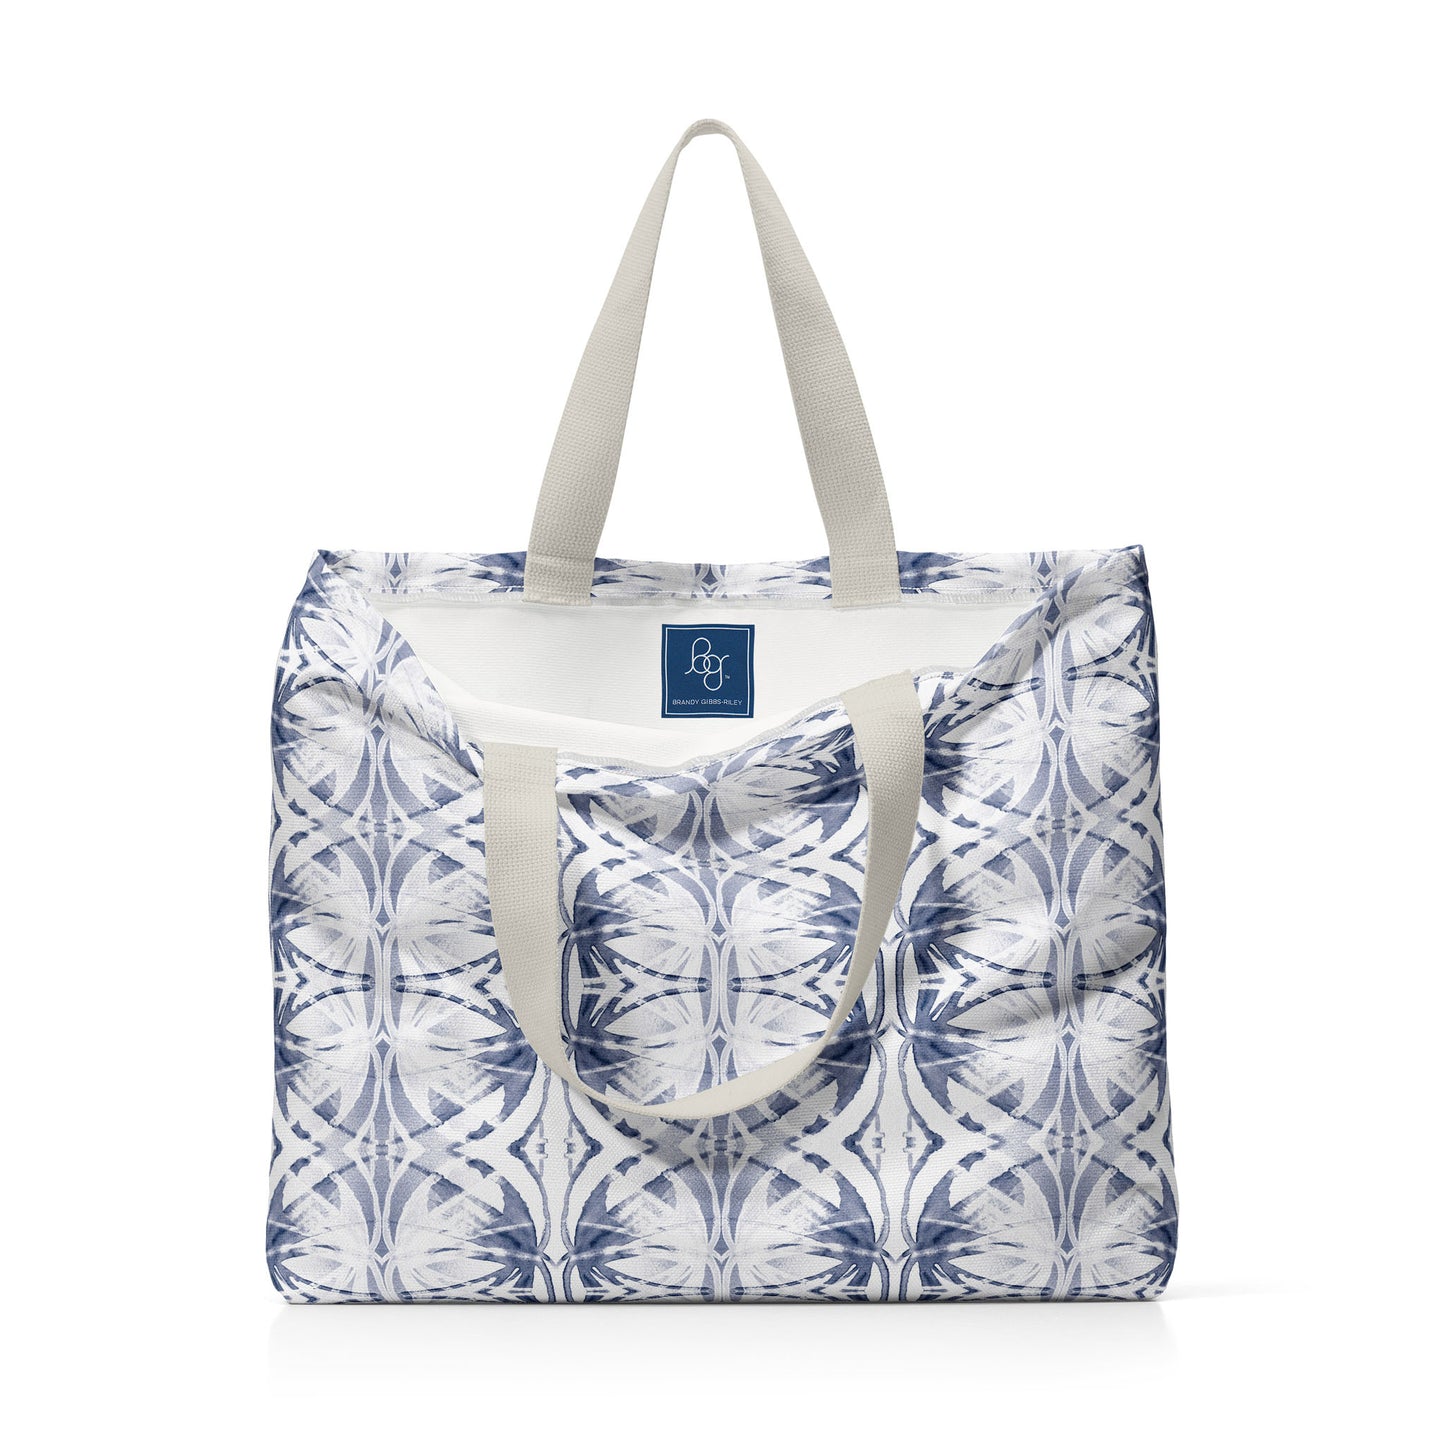 Oversized tote bag featuring a blue and white abstract pattern and interior blue label